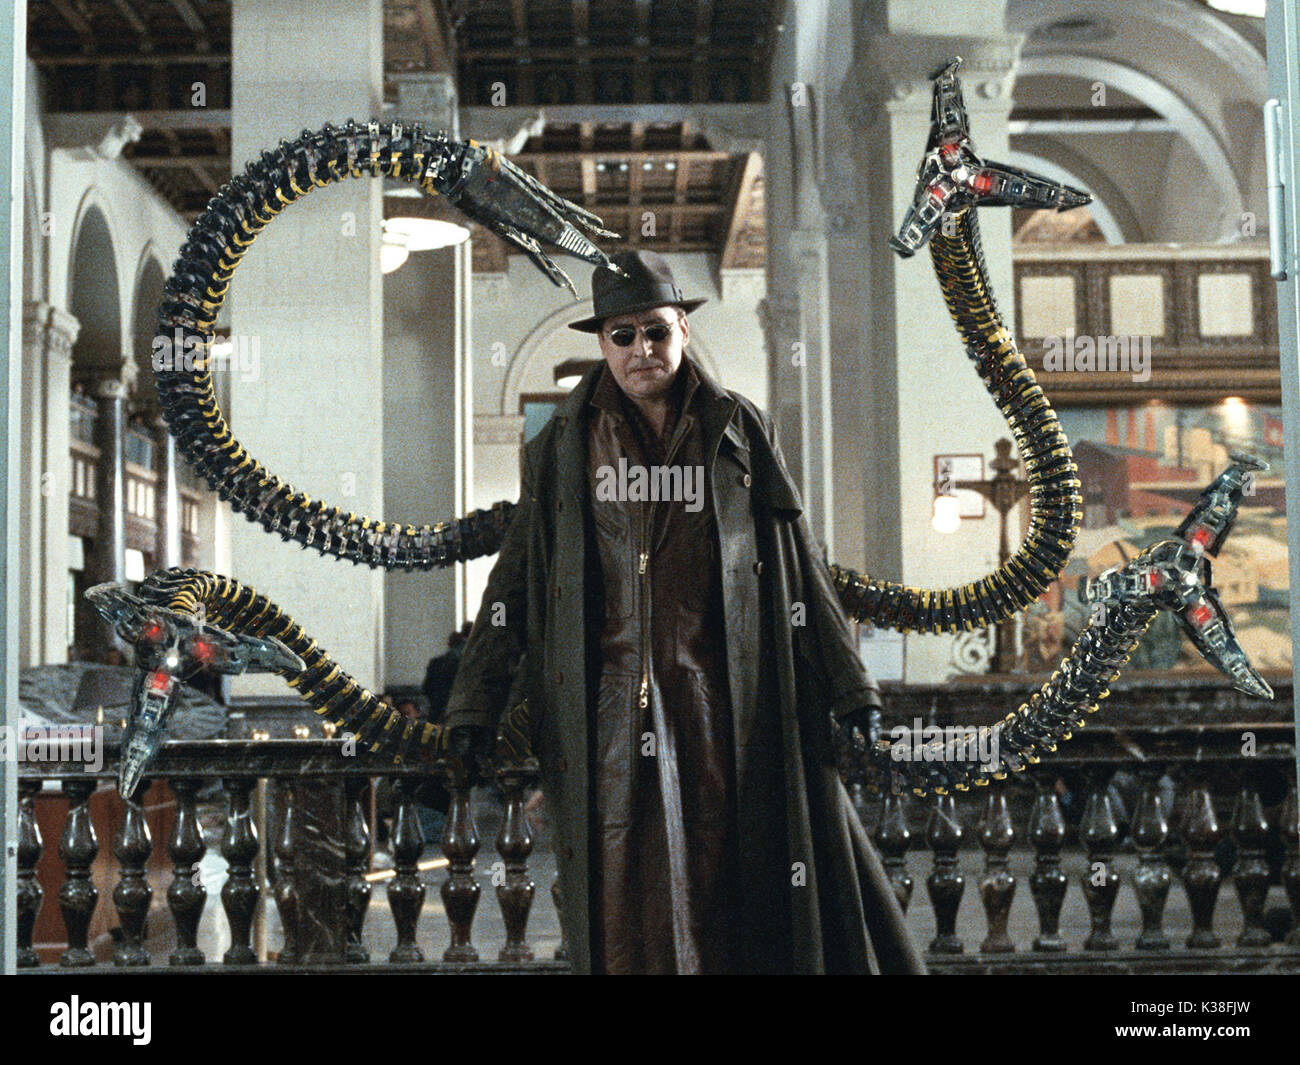 SPIDER-MAN 2 [US/2004]  ALFRED MOLINA as Doc Ock 'Octopus' / Dr. Otto Octavious     Date: 2004 Stock Photo